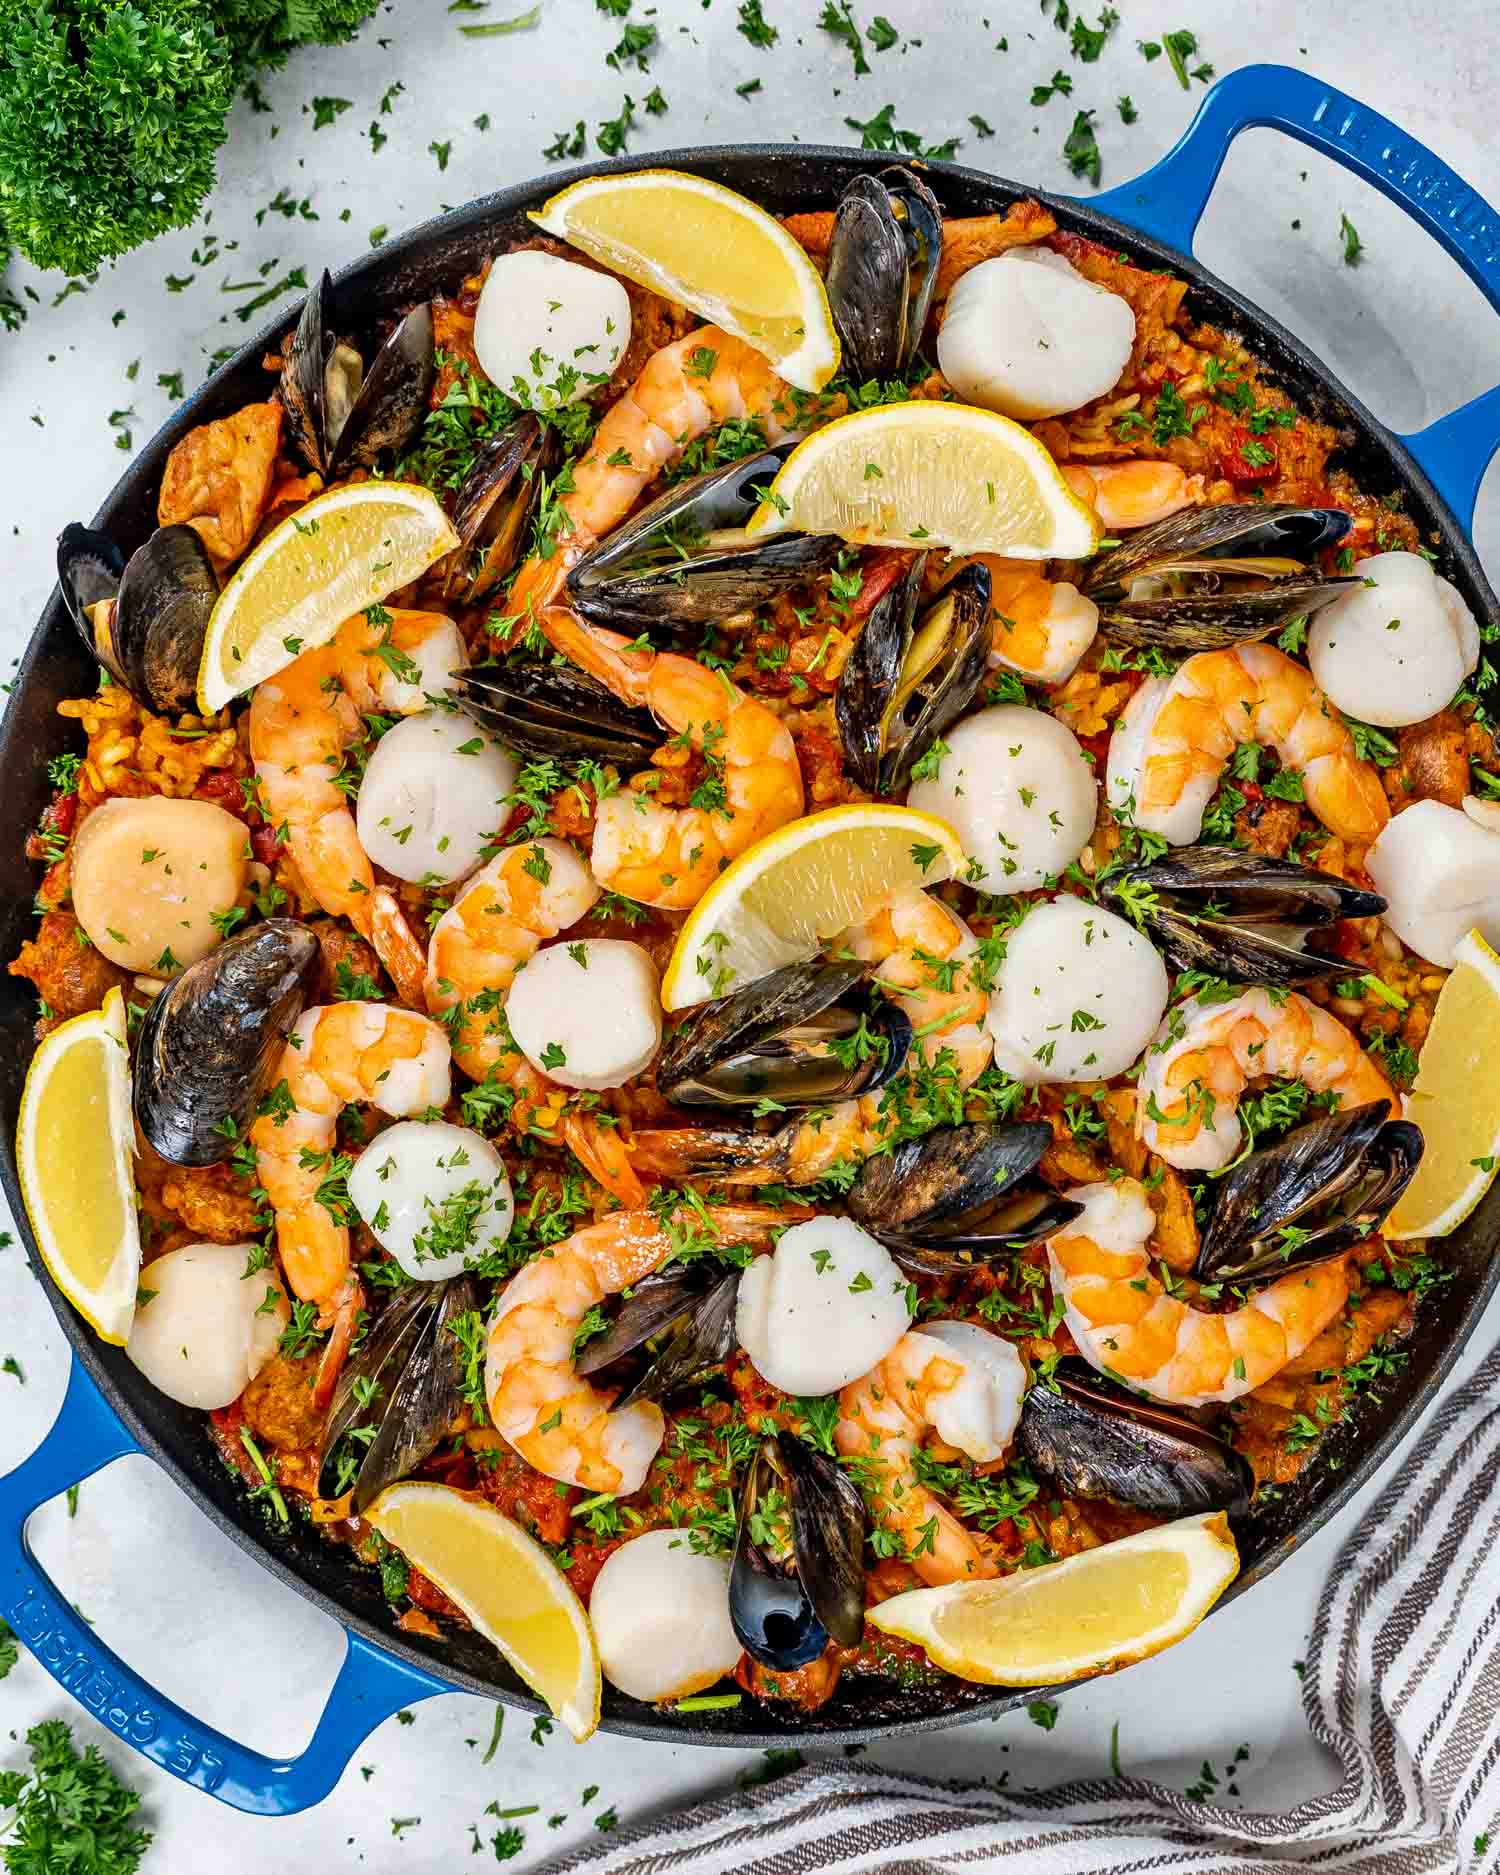 freshly made paella in a paella pan garnished with lemons and parsley.